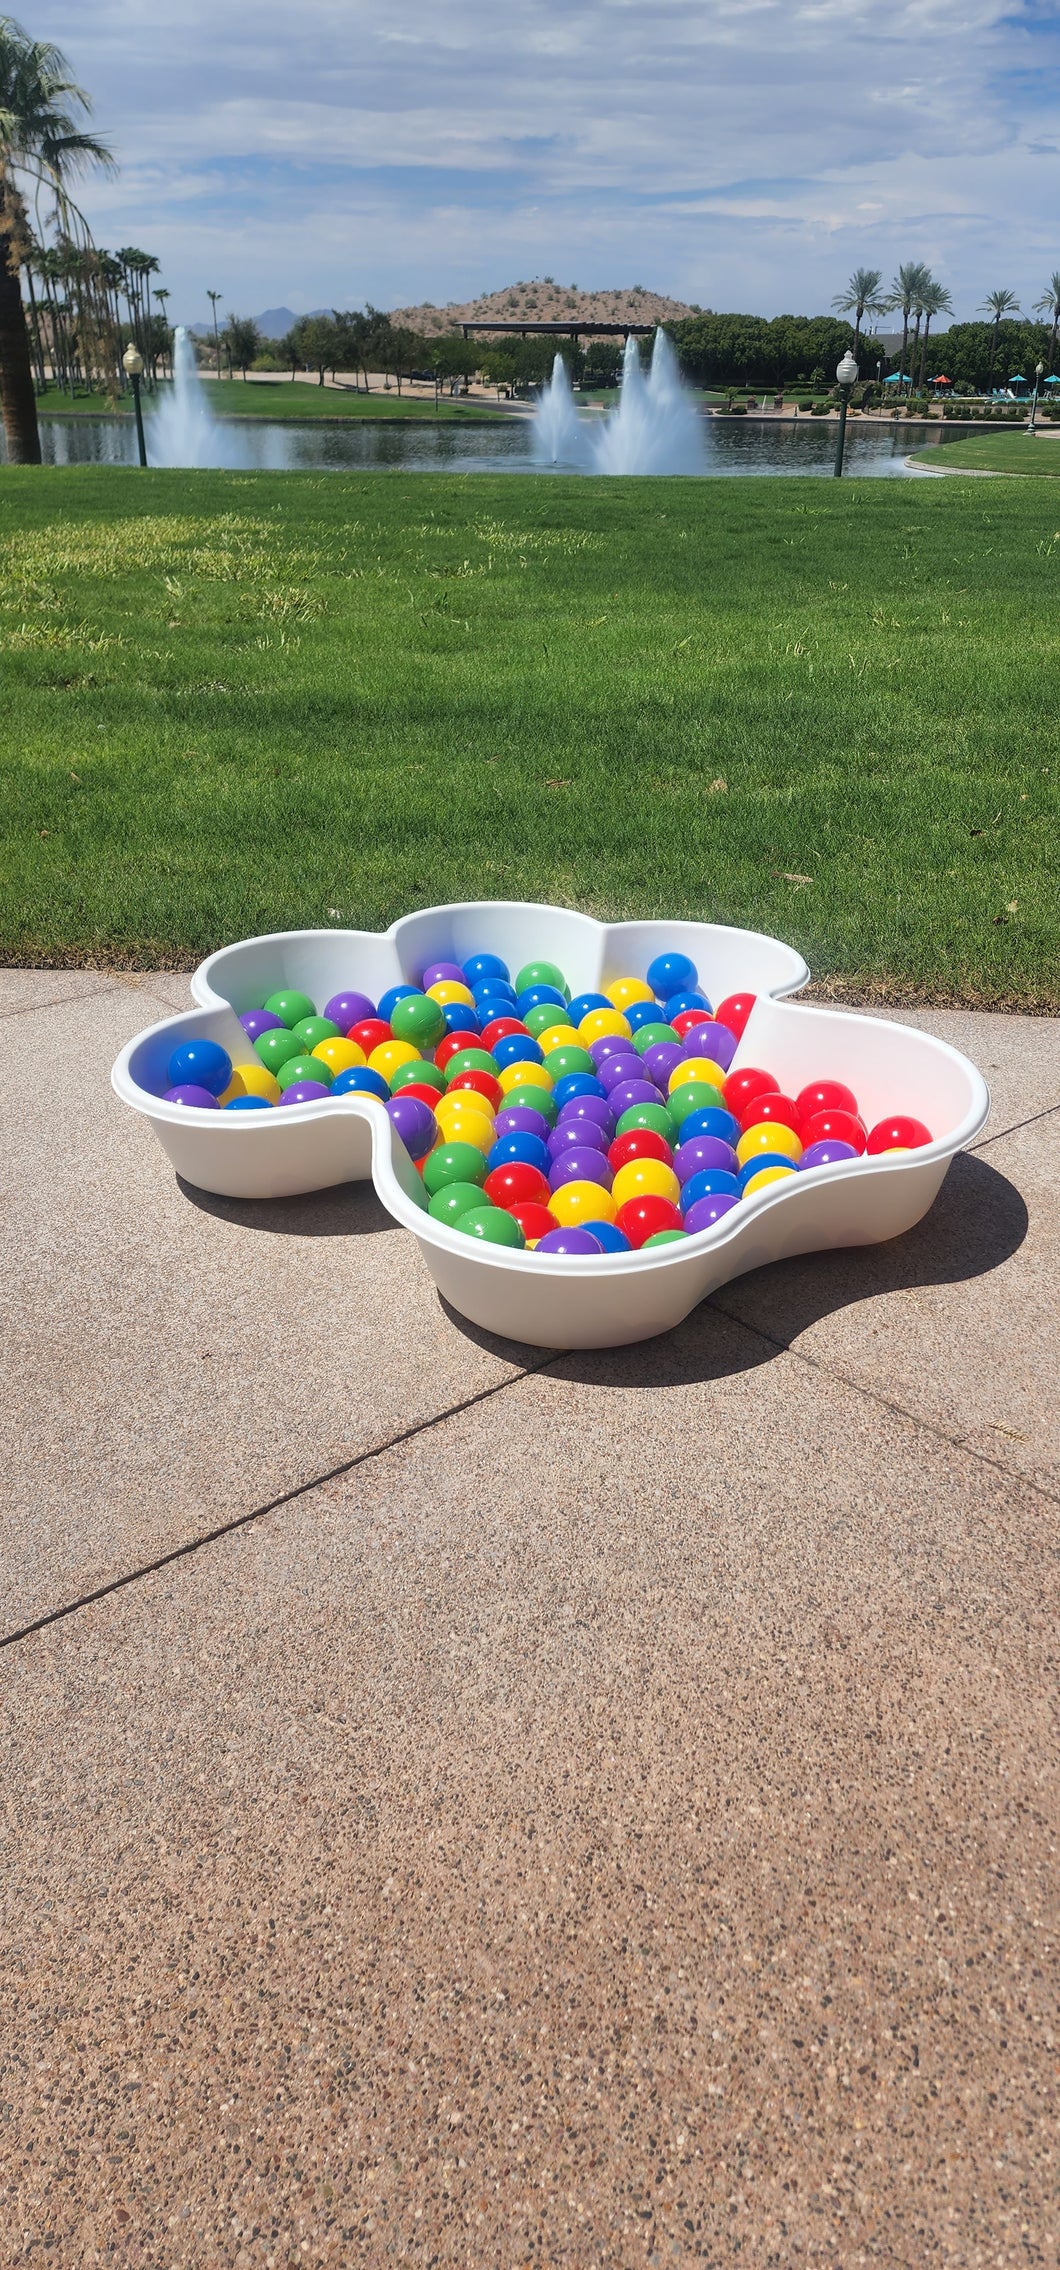 Add 100 QTY 3 Inch Pit Balls to Your Paw Pool Purchase 🔴🟡🟢🔵🟣